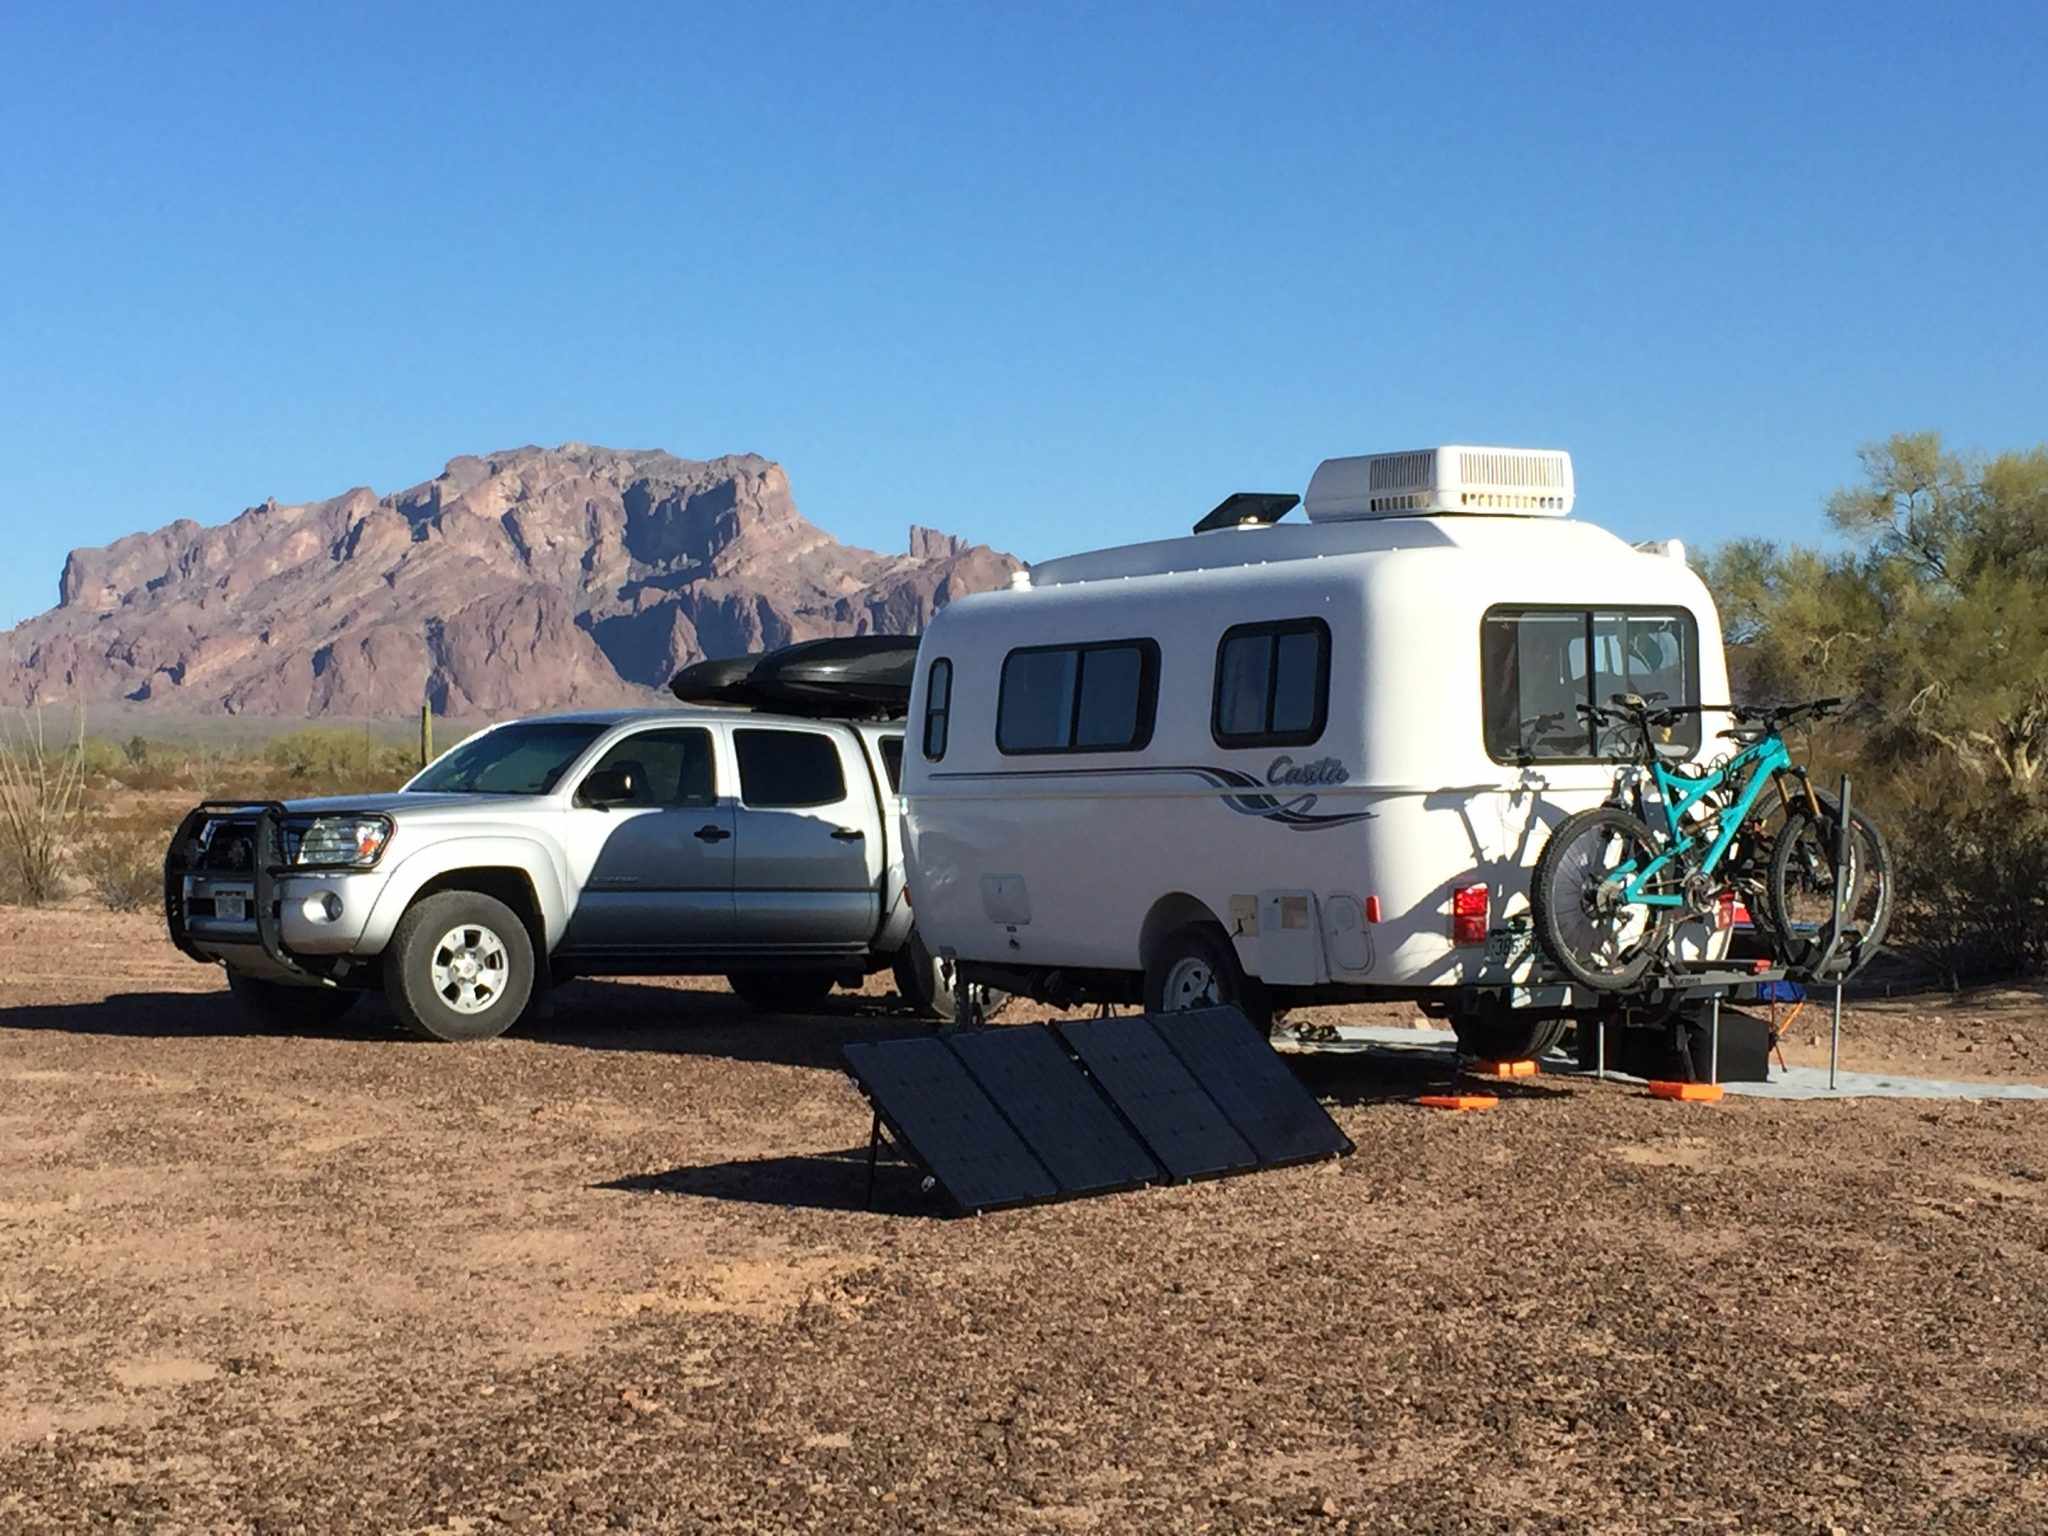 14 Things I Have Learned Living in an RV